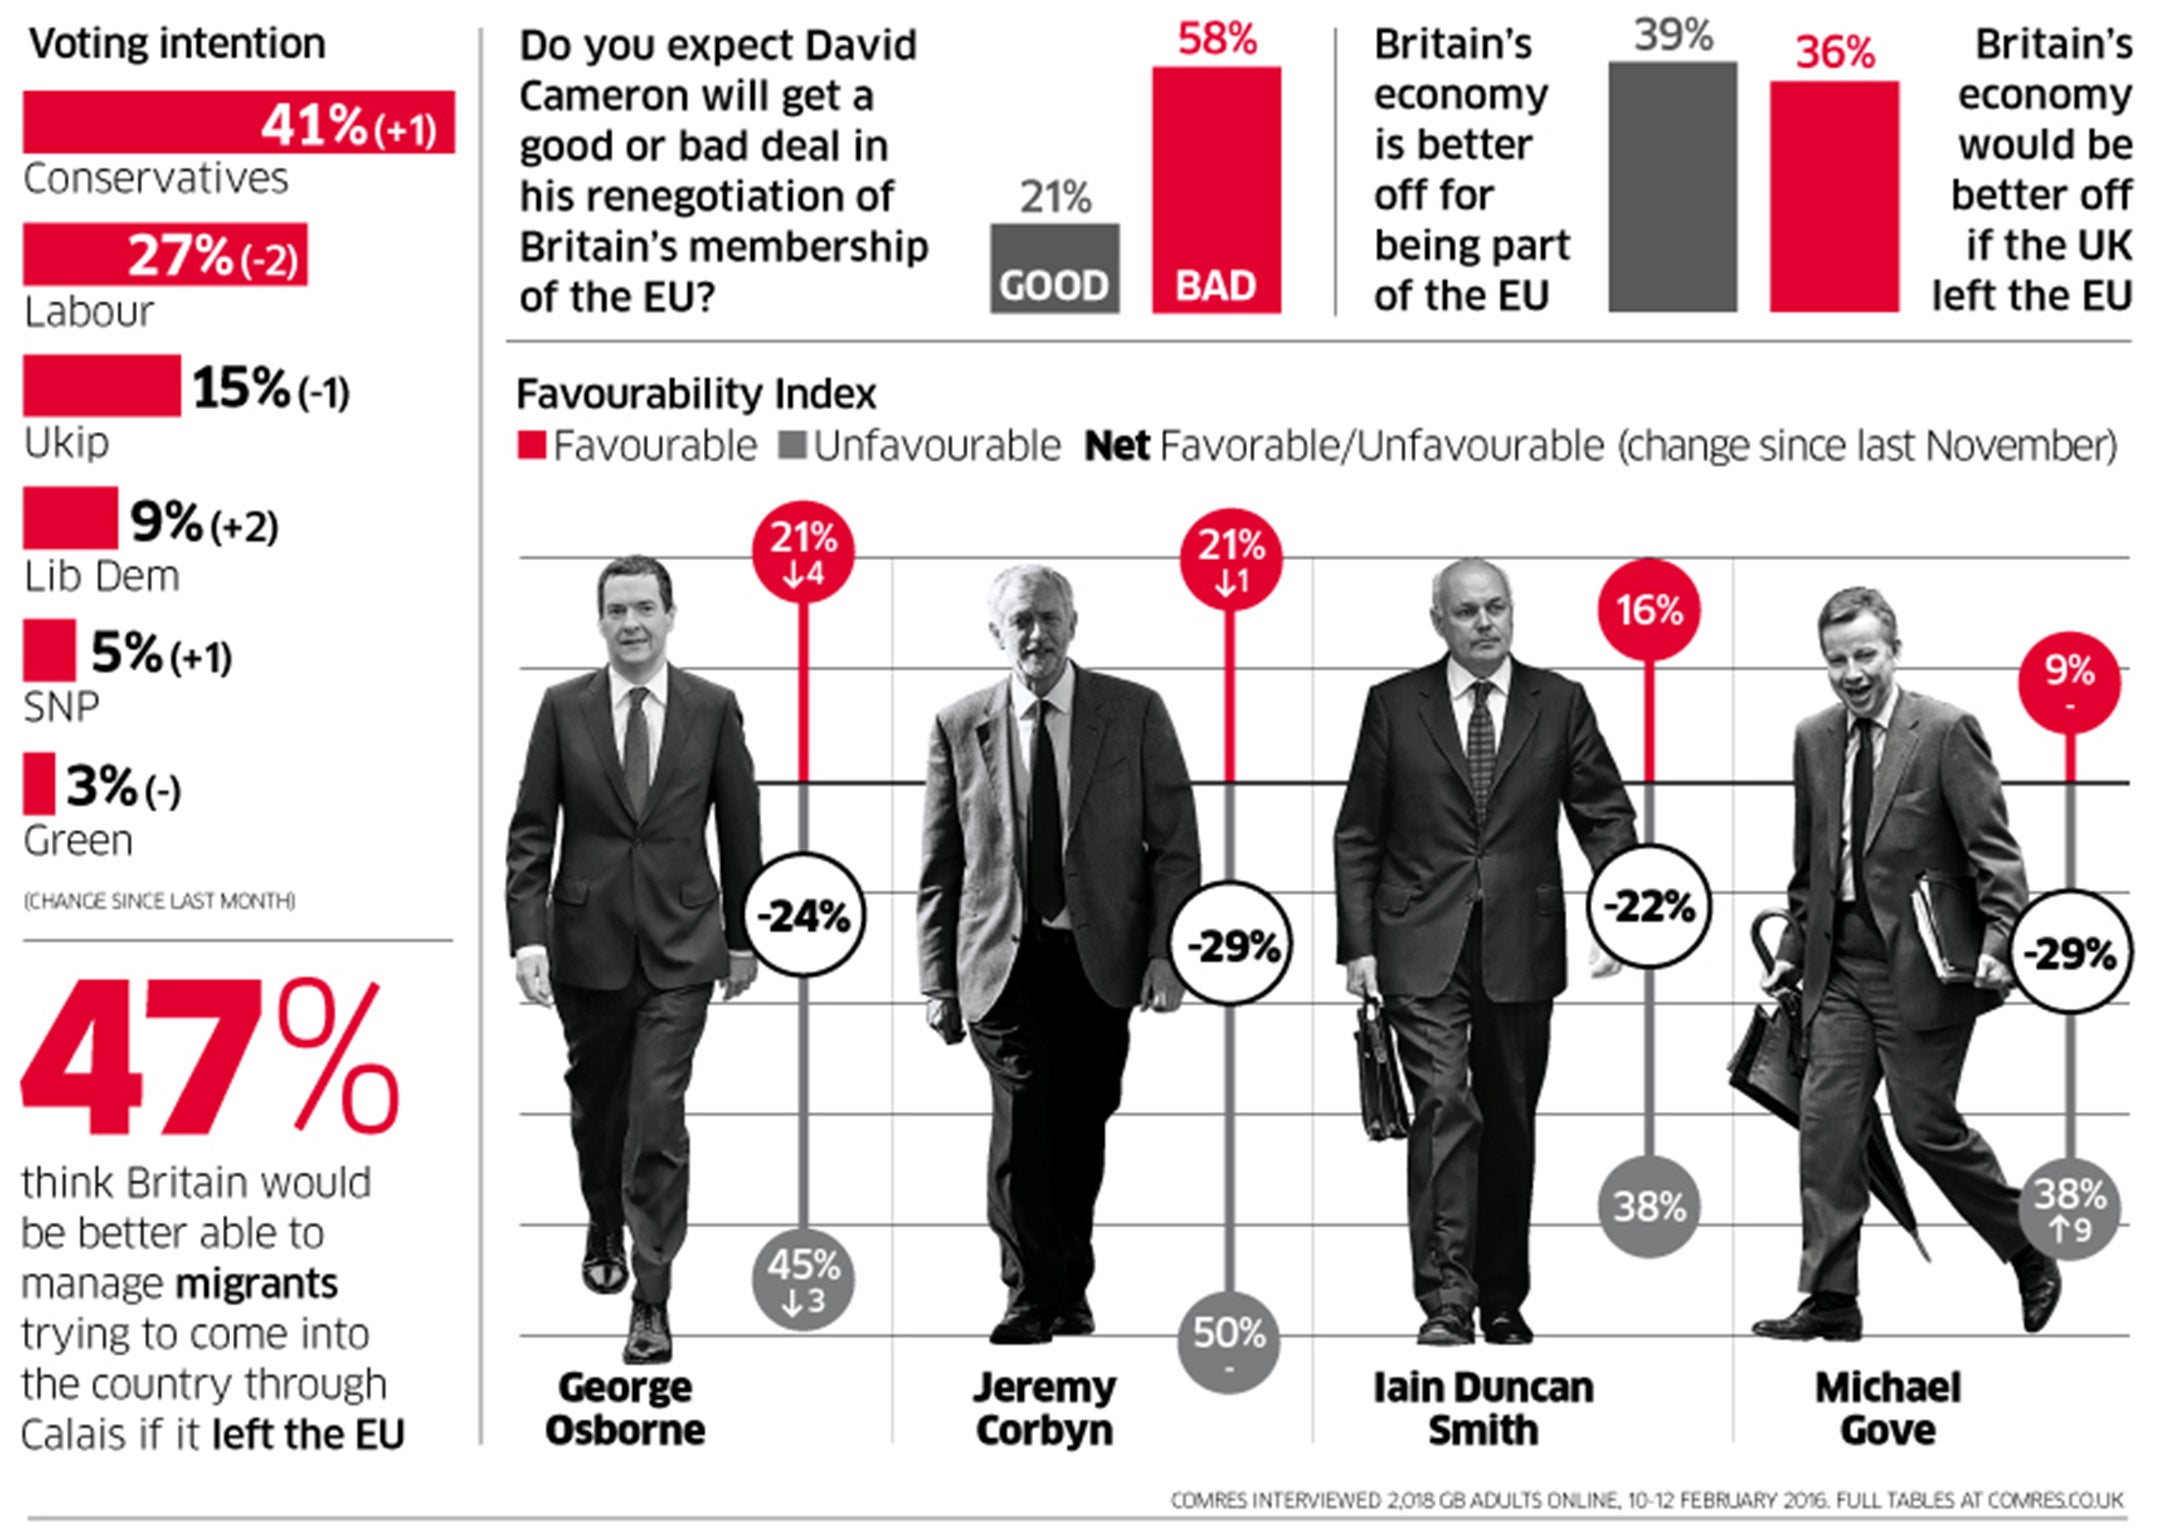 IoS Poll: Cameron expected to get a bad deal in Brussels